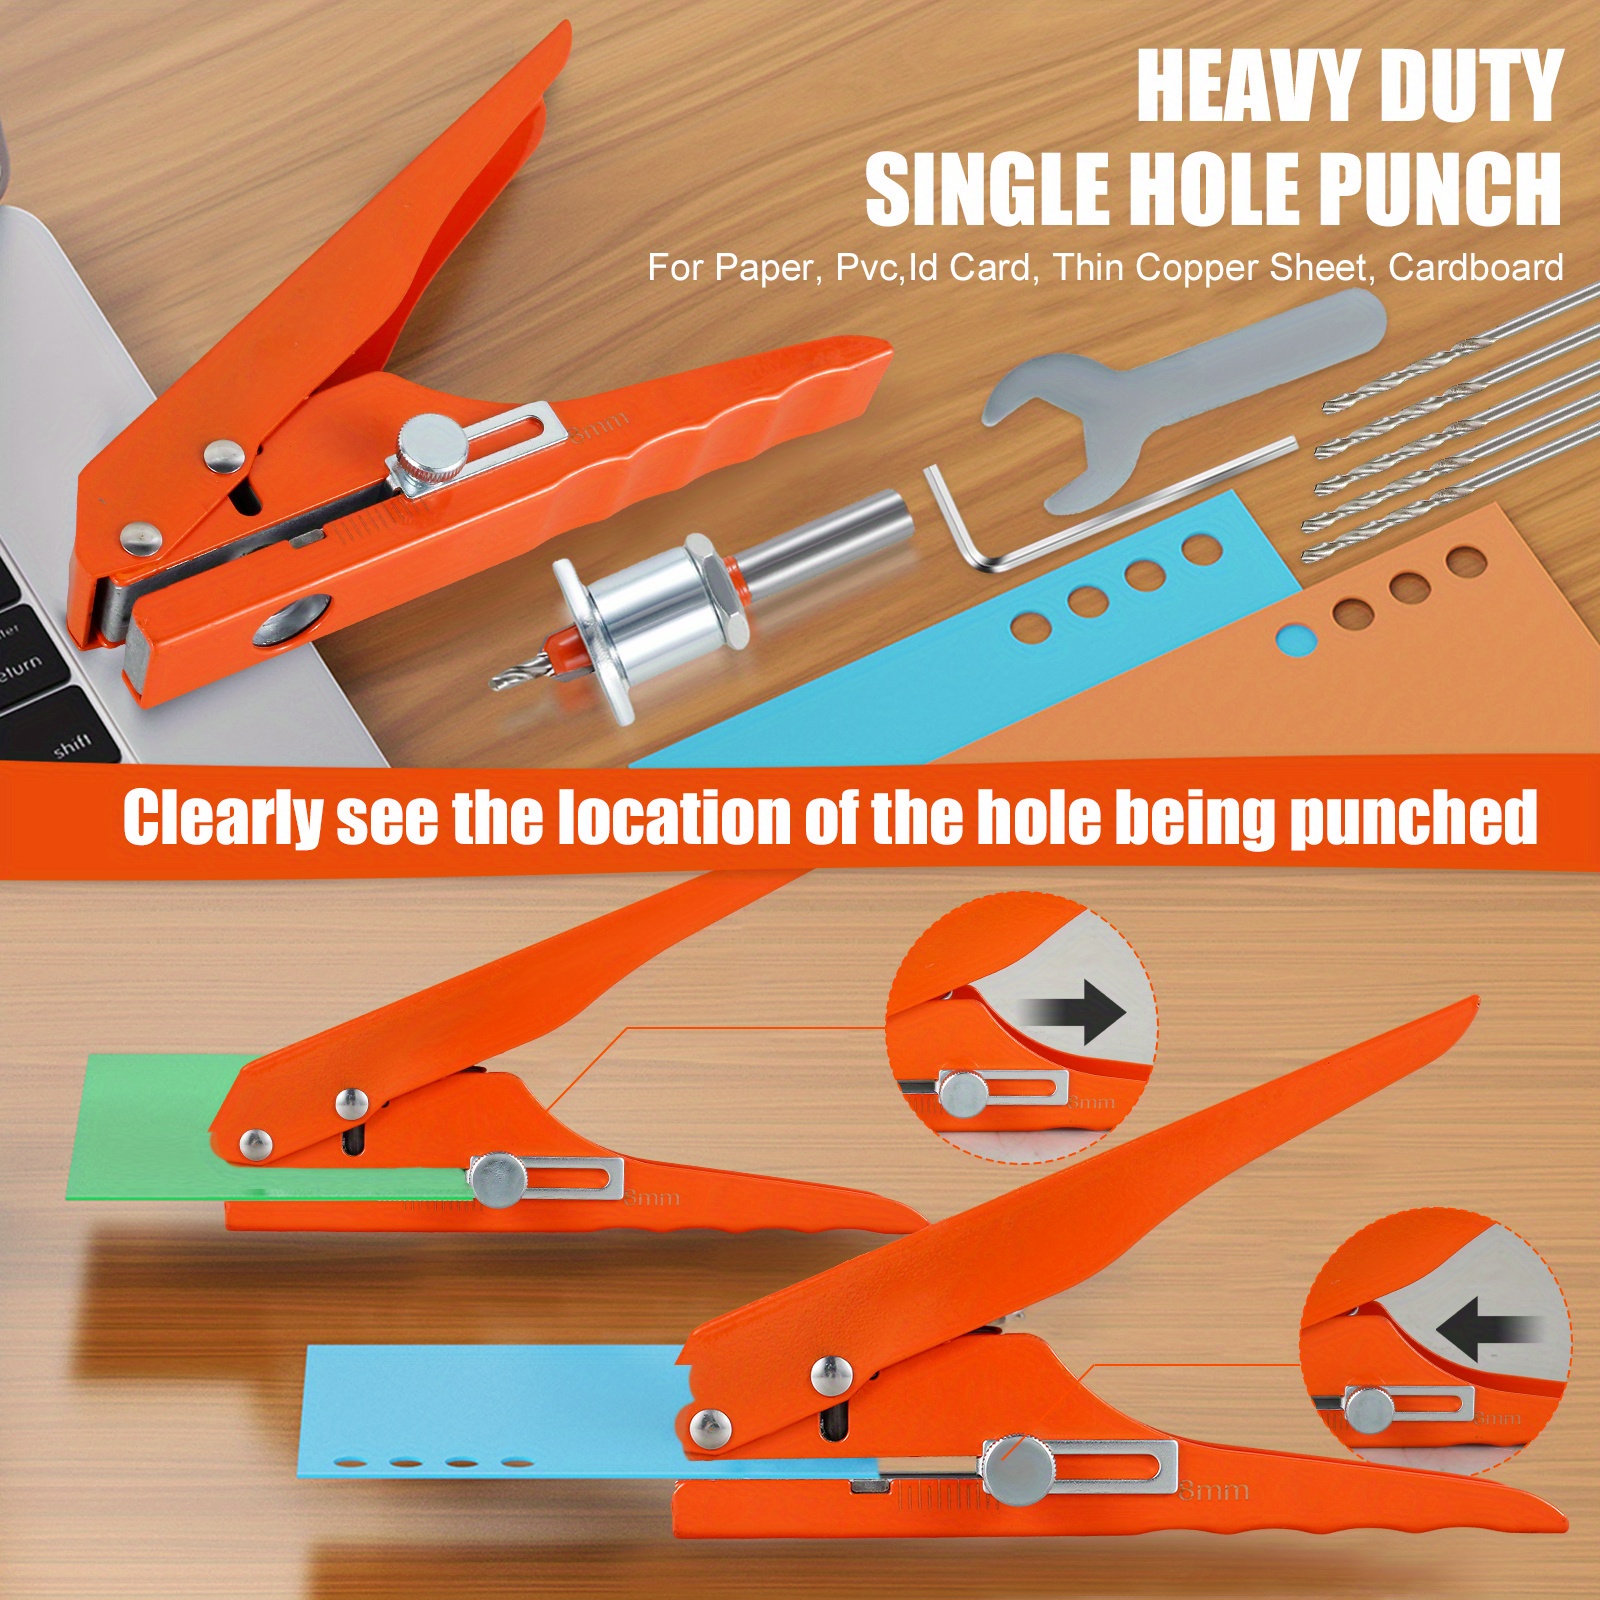 Round Single Hole Heavy Duty Metal Hand Punch - Hole Punch Tool For Id  Cards, Badges, Photos, Tags